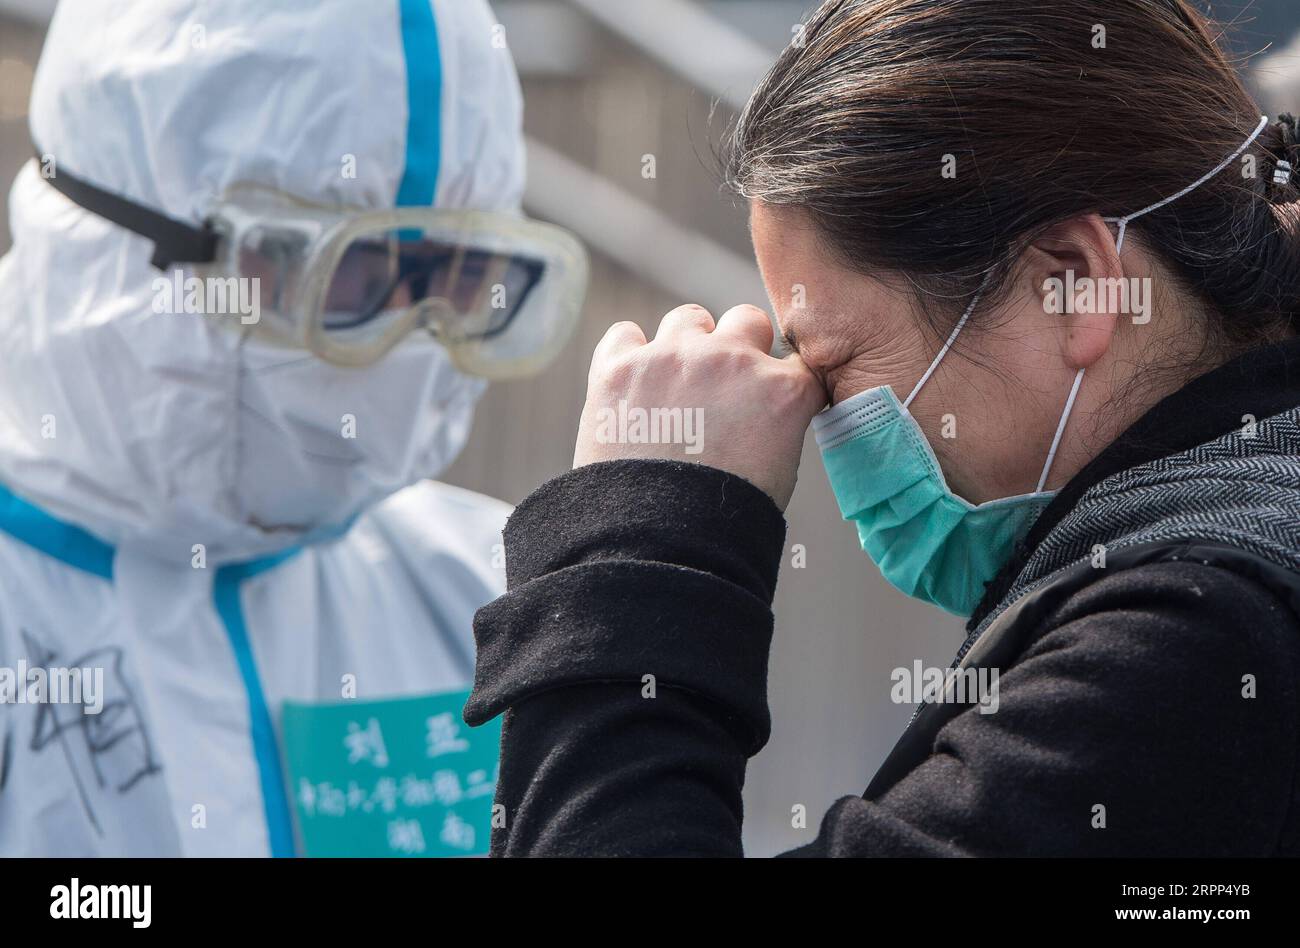 200311 -- BEIJING, March 11, 2020 -- A cured coronavirus patient weeps out of joy as leaving the Wuchang temporary hospital in Wuhan, central China s Hubei Province, March 10, 2020.  XINHUA PHOTOS OF THE DAY XiaoxYijiu PUBLICATIONxNOTxINxCHN Stock Photo